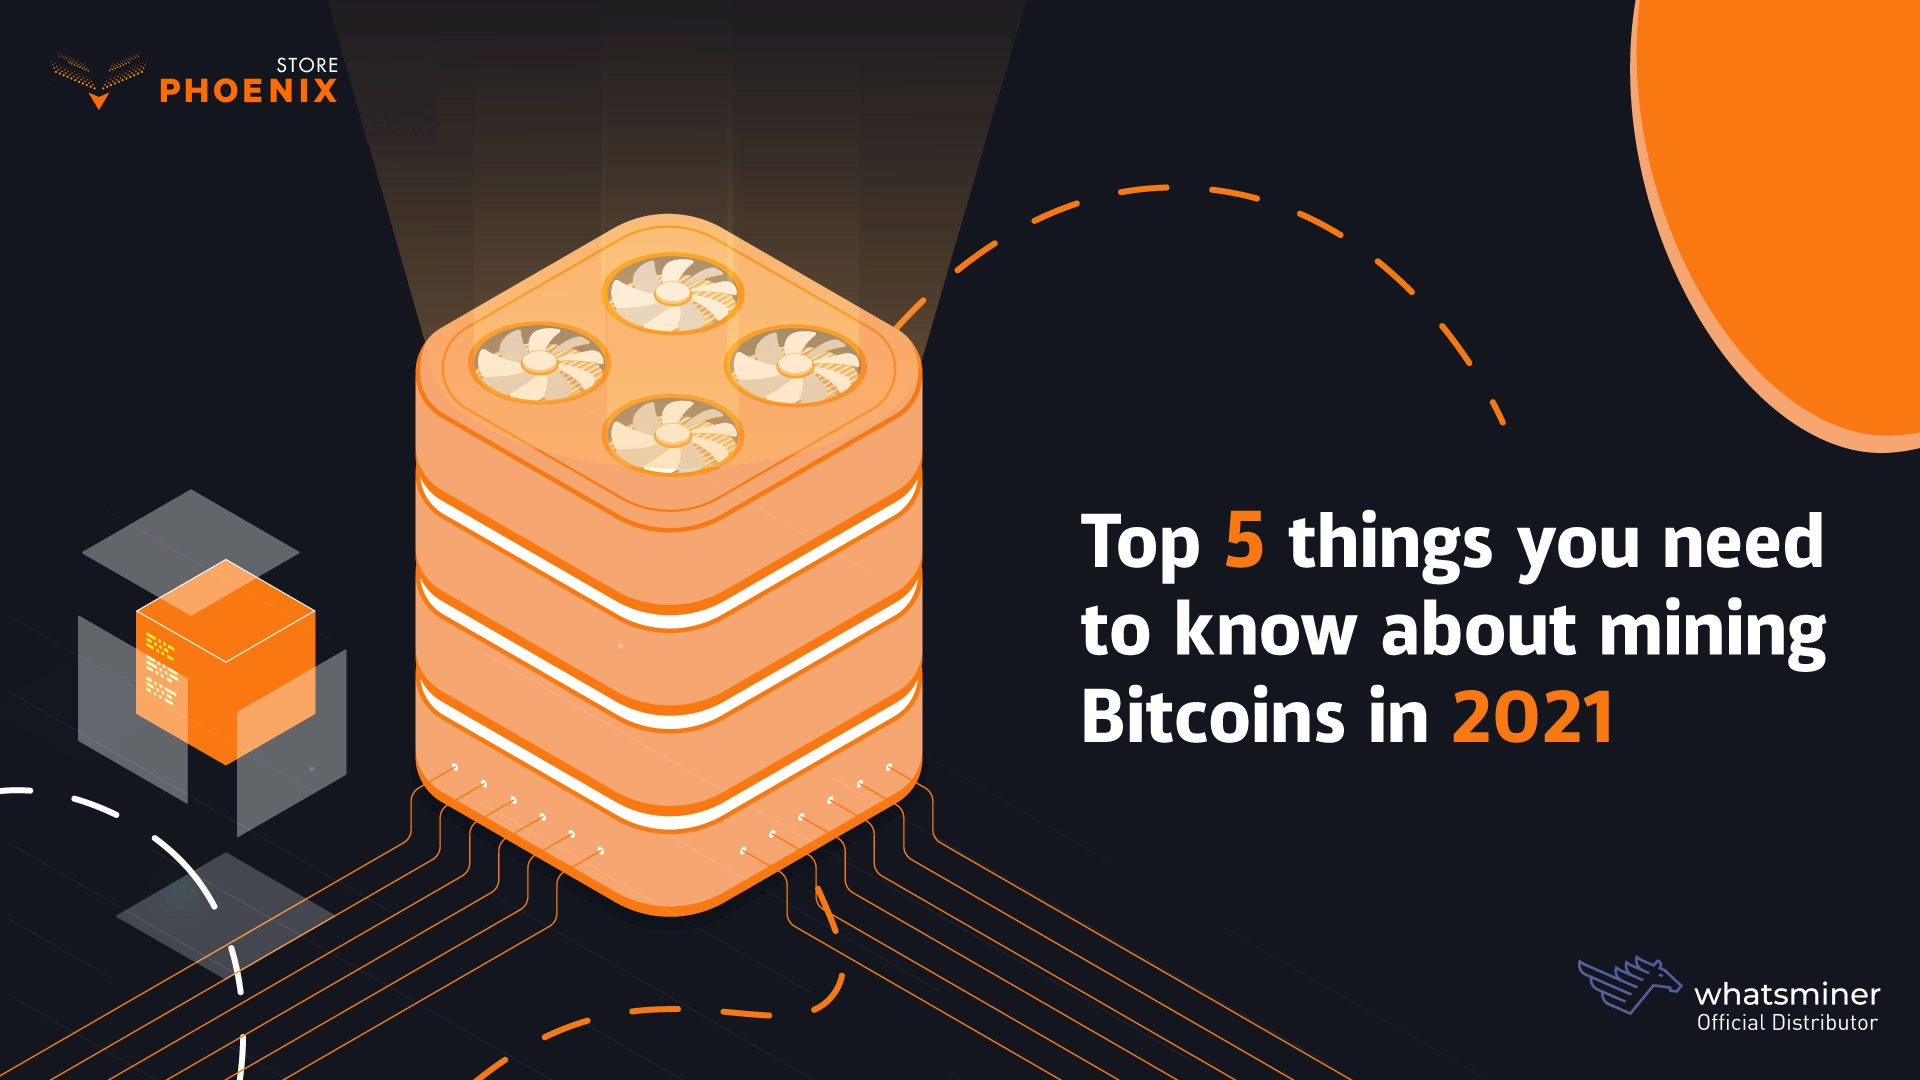 Top 5 Things You need to Know About Mining Bitcoins in 2021